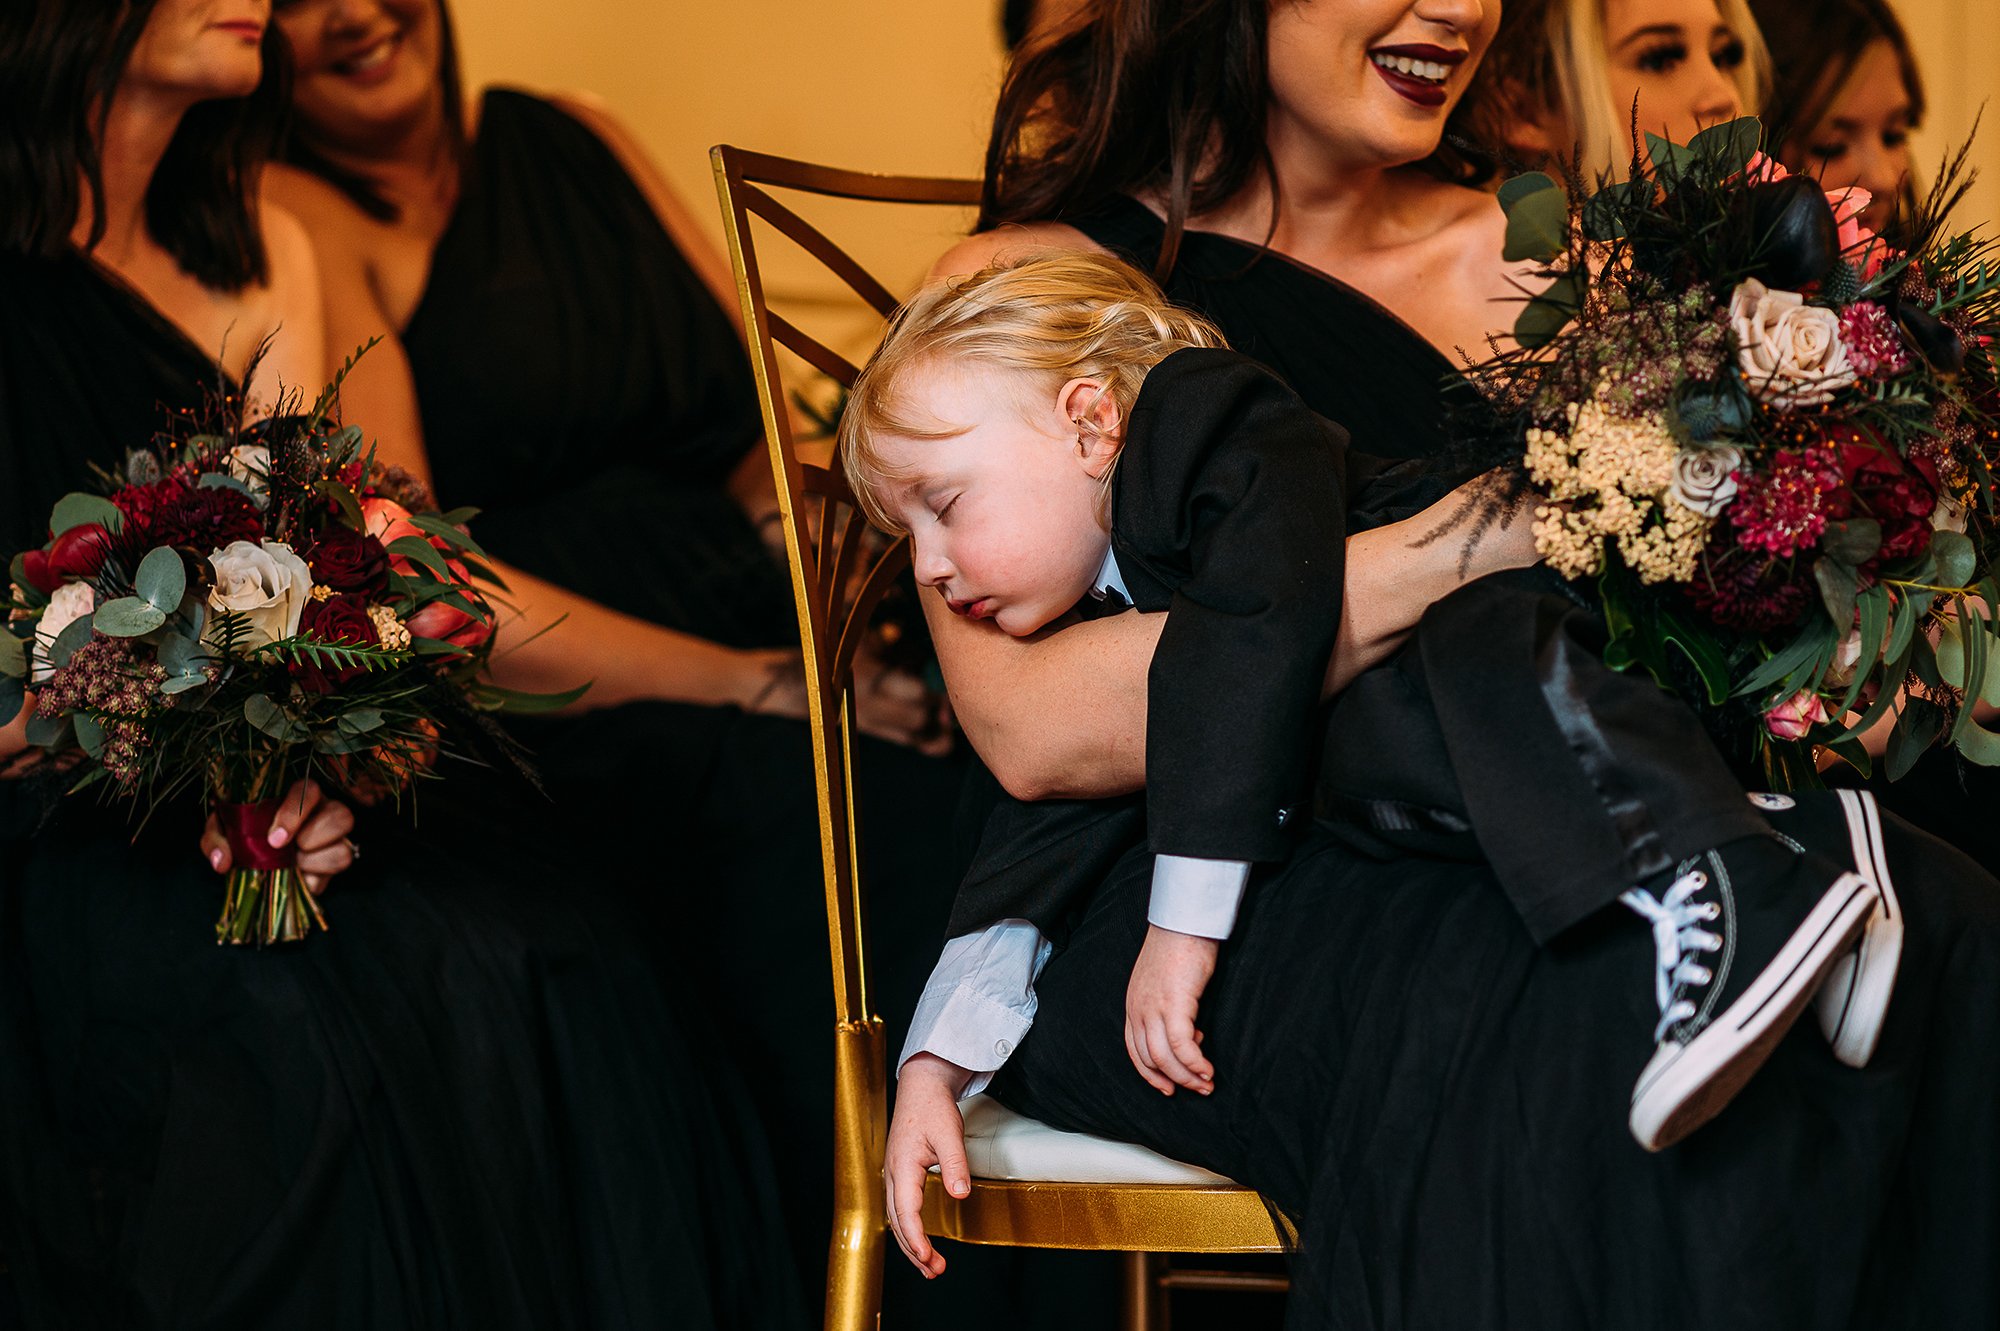  Boy falls asleep on someones arm during ceremony. 